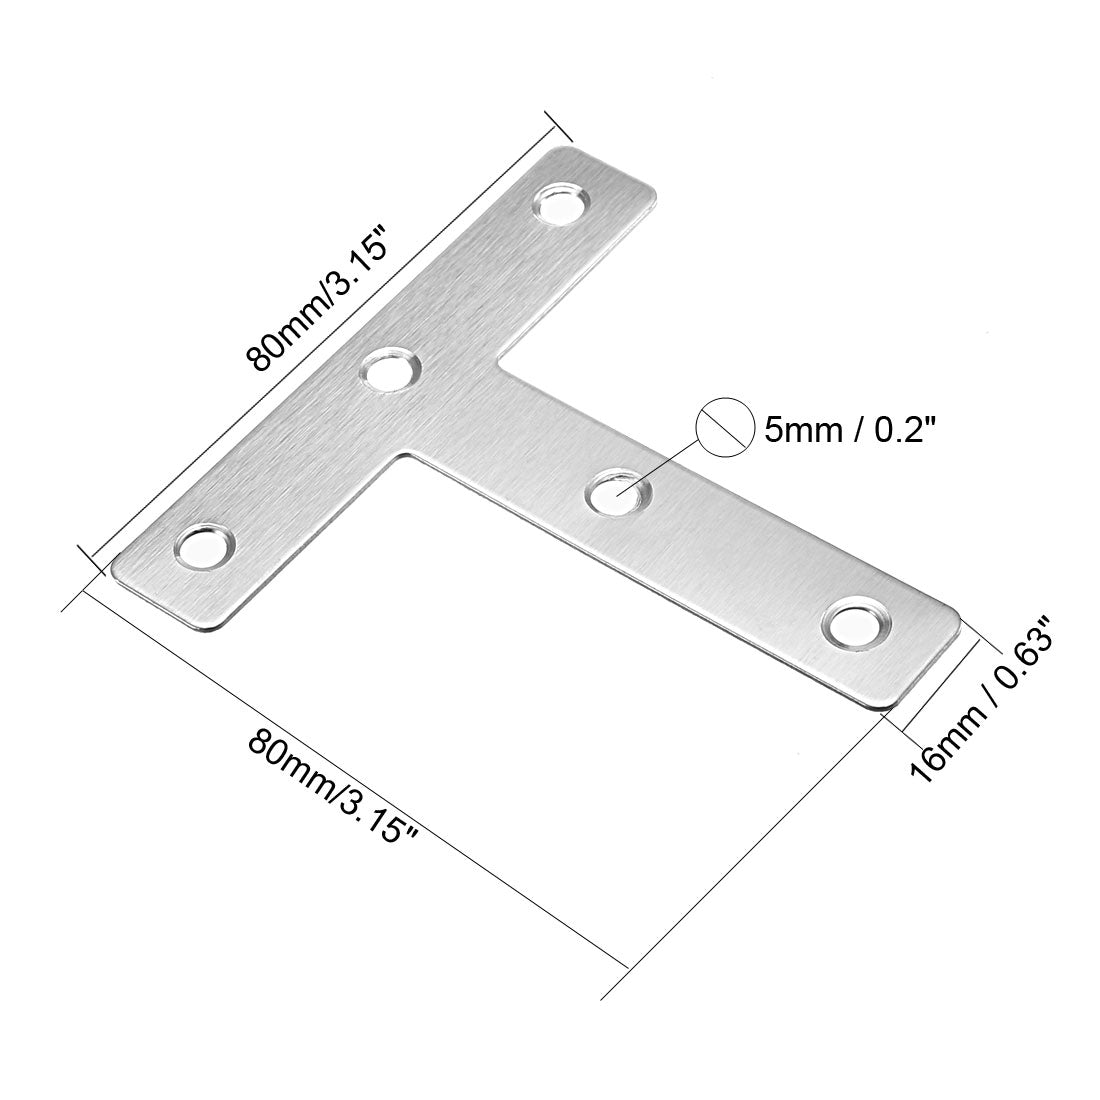 uxcell Uxcell Flat T Shape Repair Mending Plate, 80mmx80mm, Stainless steel Joining Bracket Support Brace, 10pcs